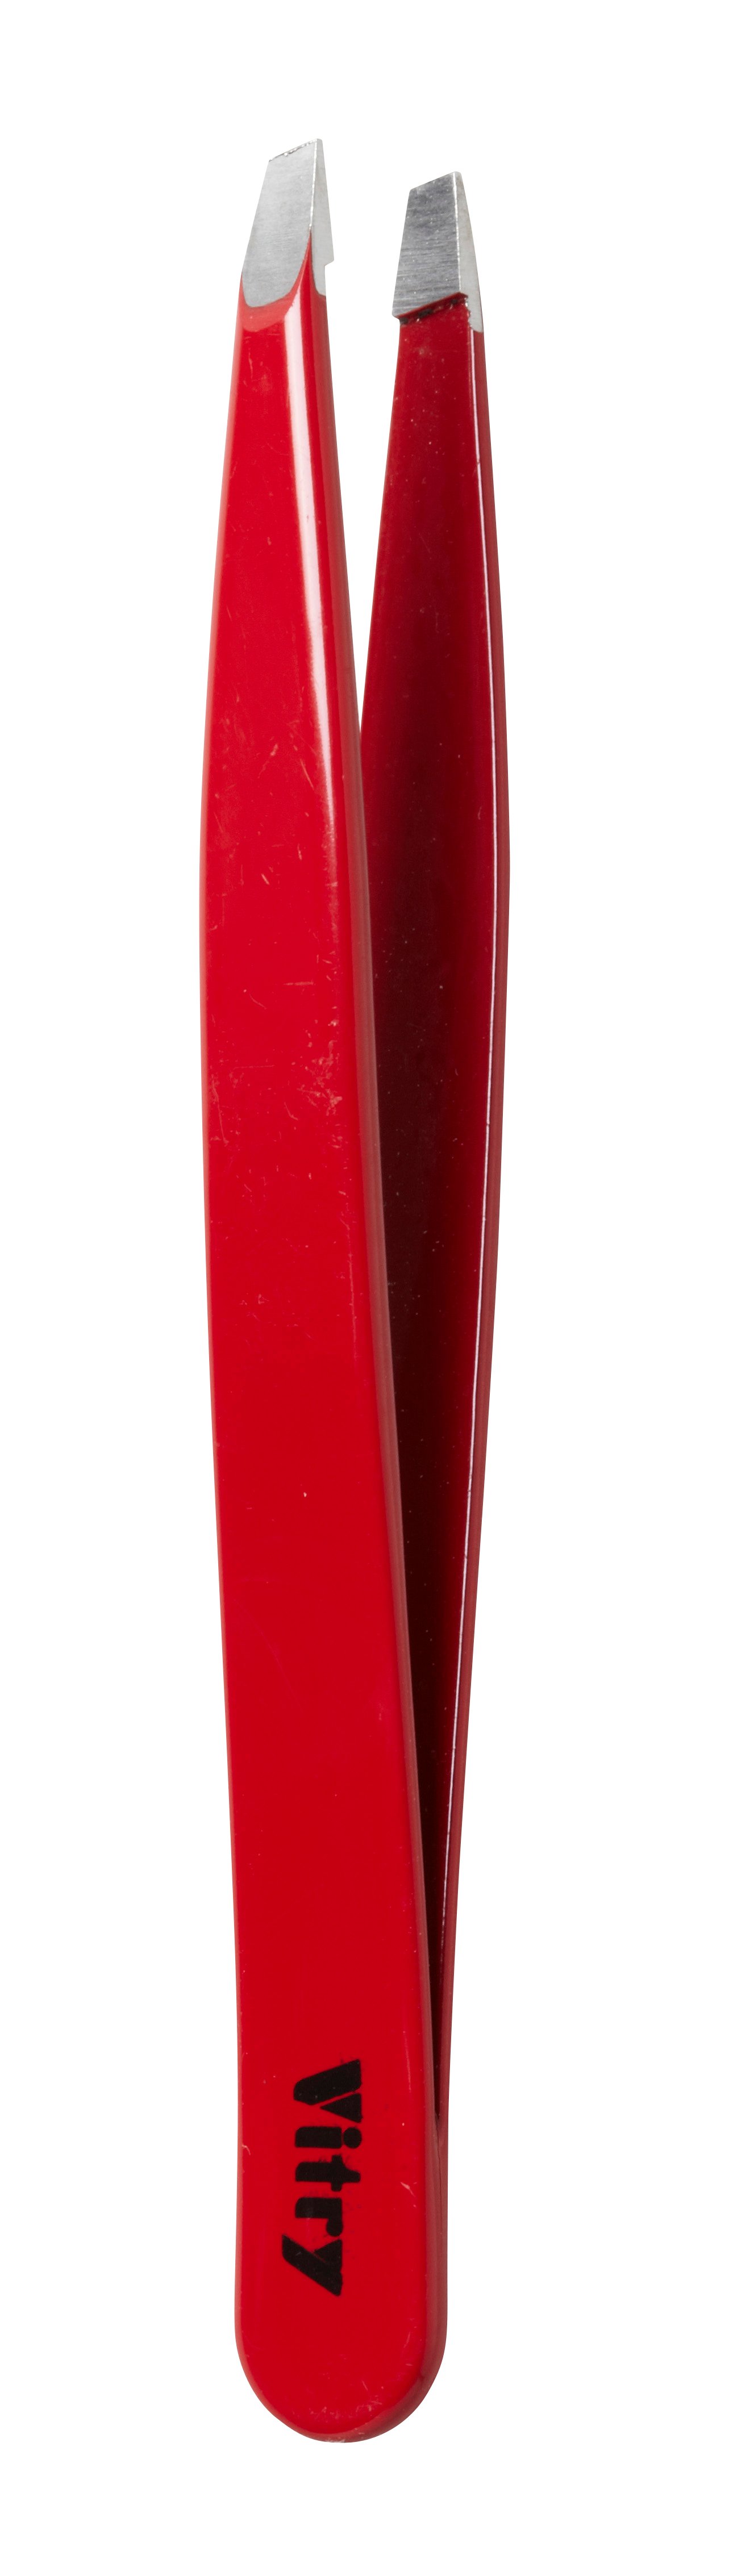 Vitry Professional Tweezer Slant Ends Stainless Steel Red 1 st